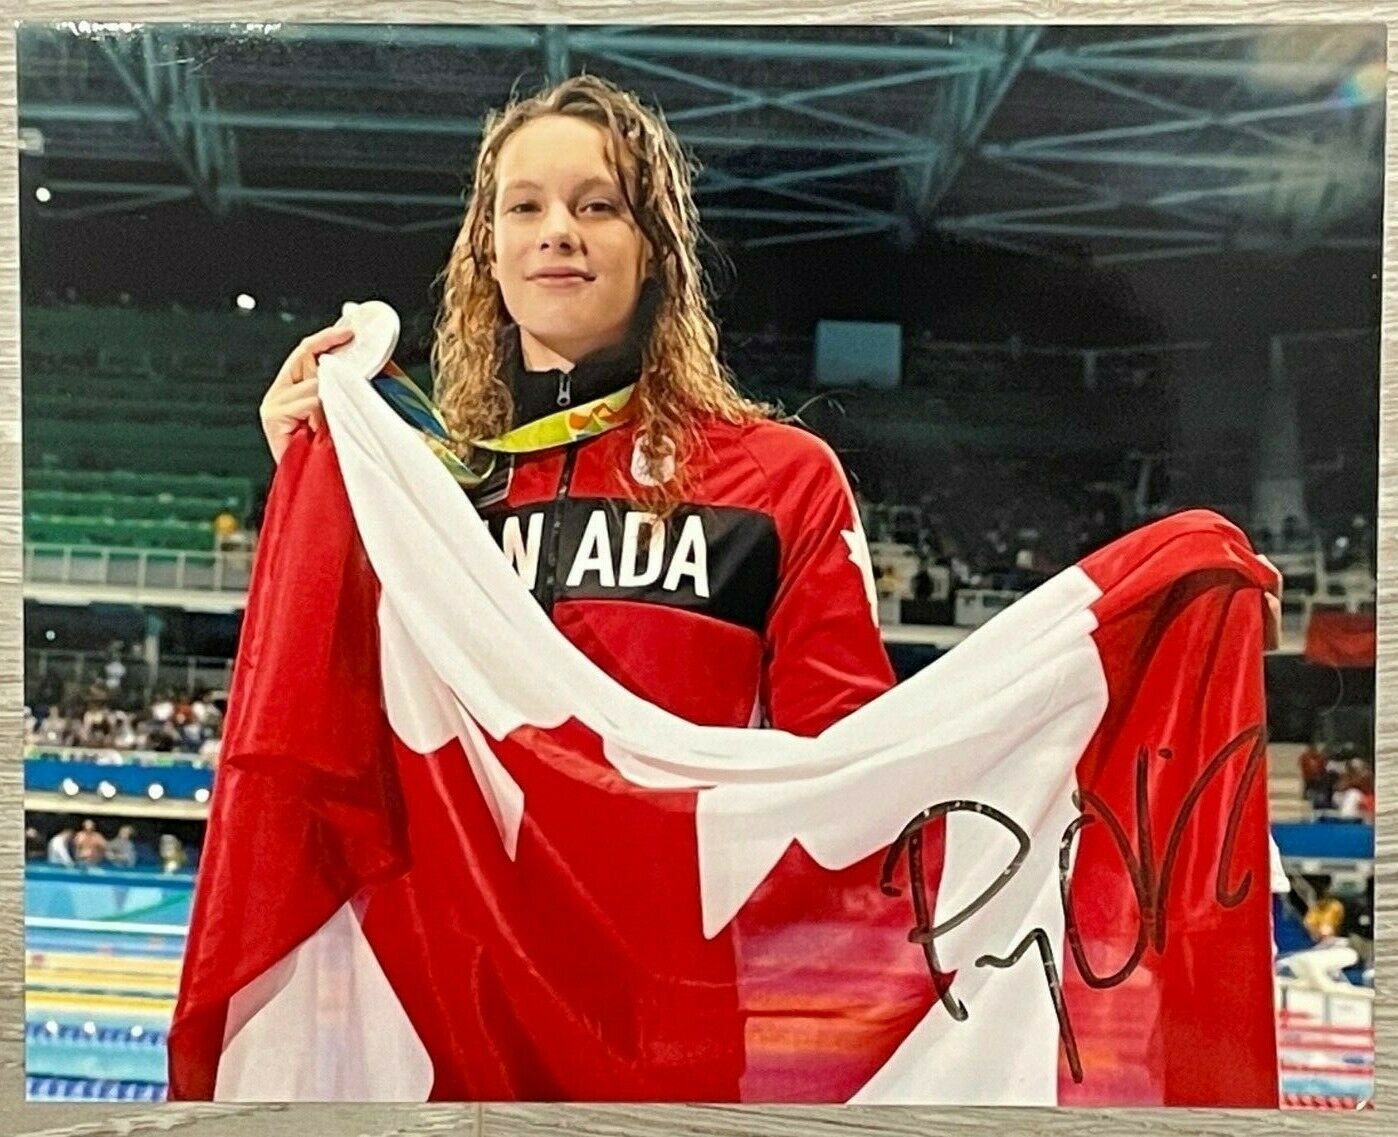 Penny Oleksiak Signed Photo (8x10) - Team Canada - Olympics Gold Medal